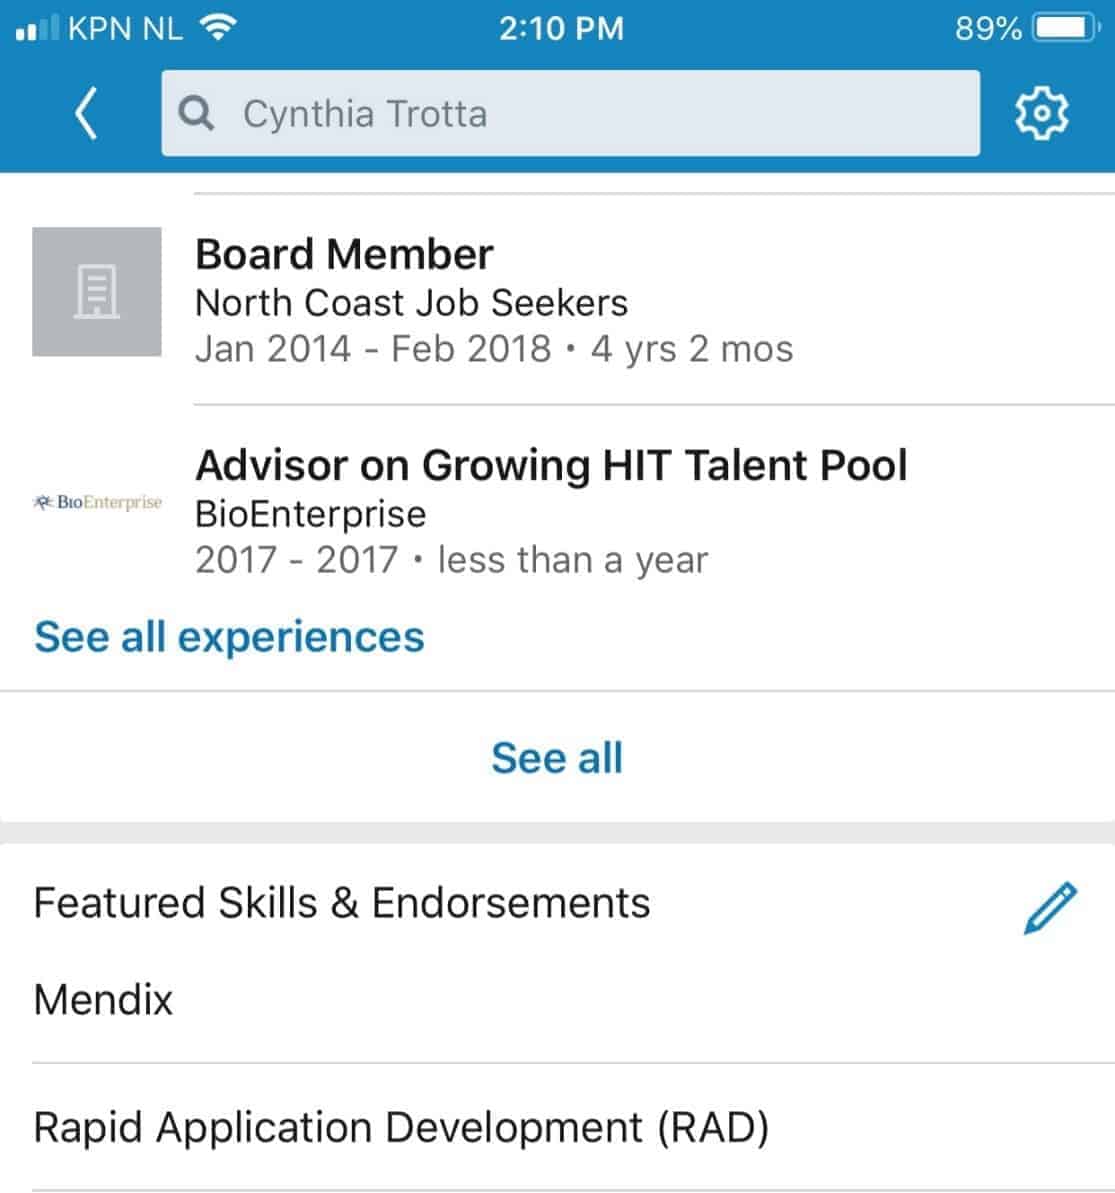 How Your Newly Added Mendix and RAD Skills Appear in LinkedIn's Mobile Dashboard